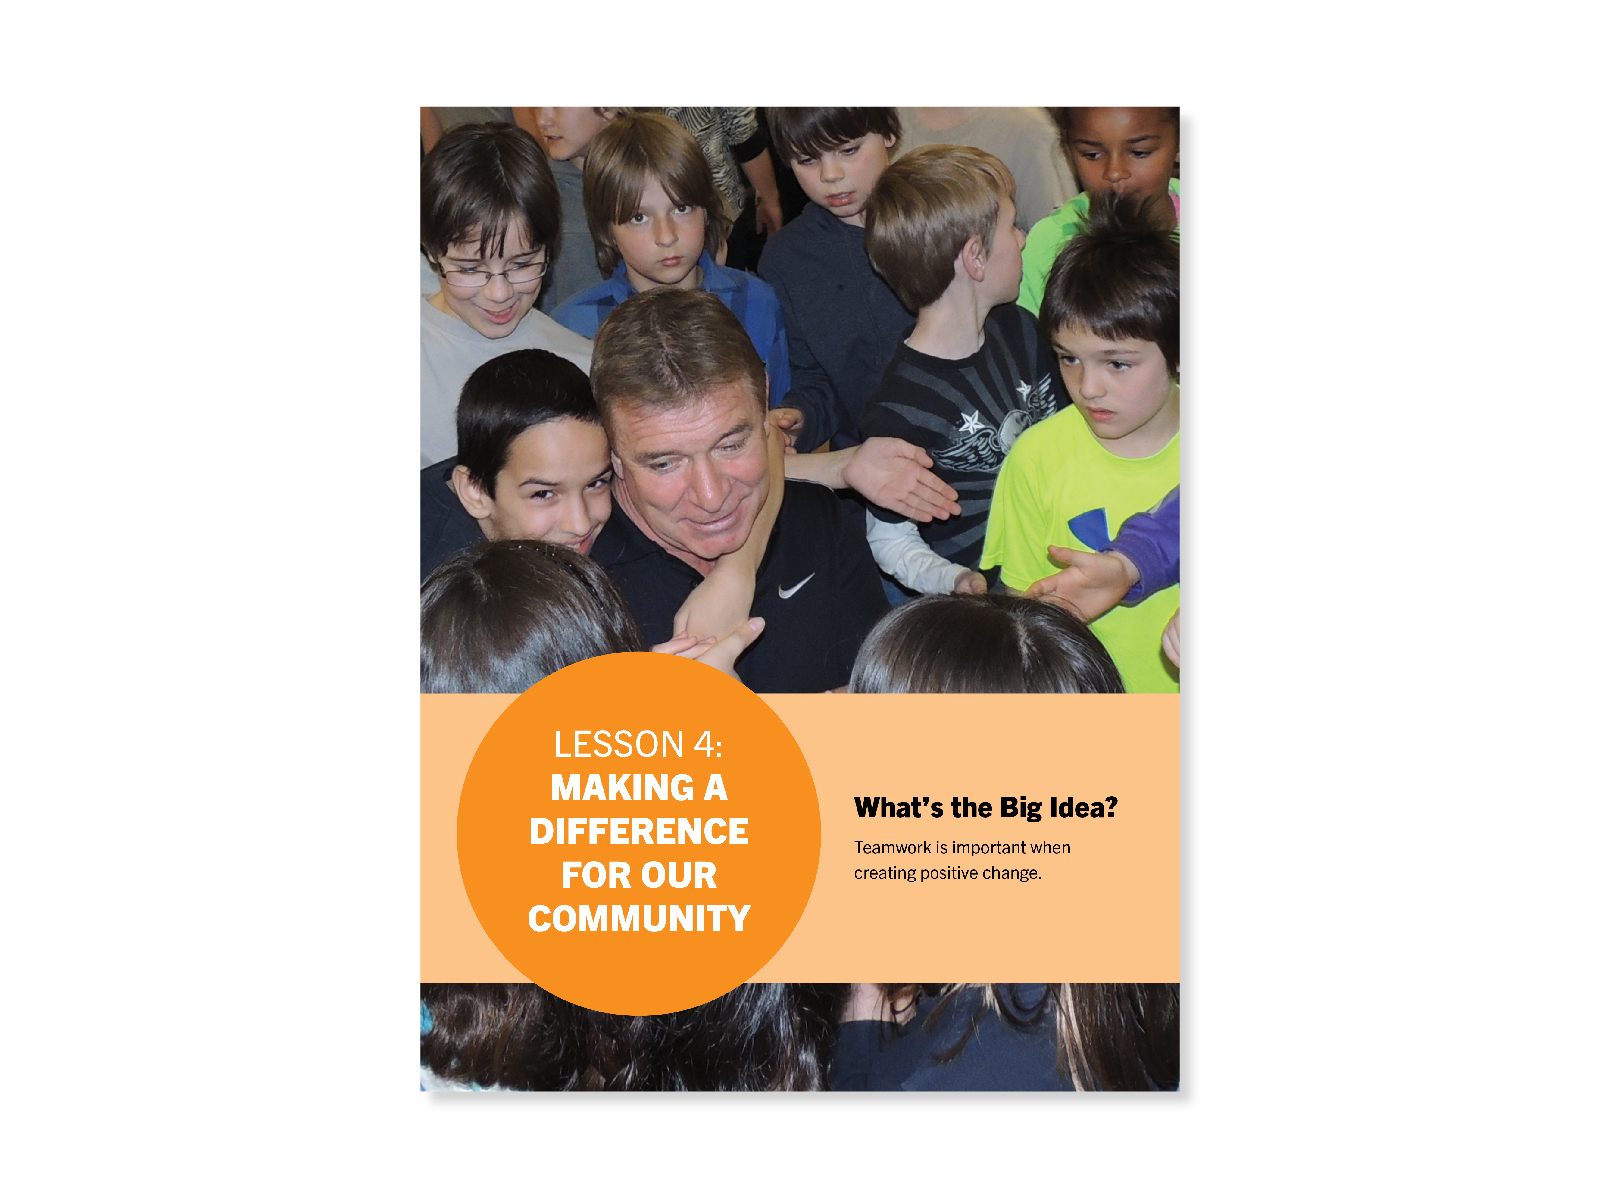 Rick Hansen surrounded by a group of elementary-aged kids. One boy is hugging Rick from behind with his arm around Rick's neck. Cover for "Making a Difference for our Community" lesson.